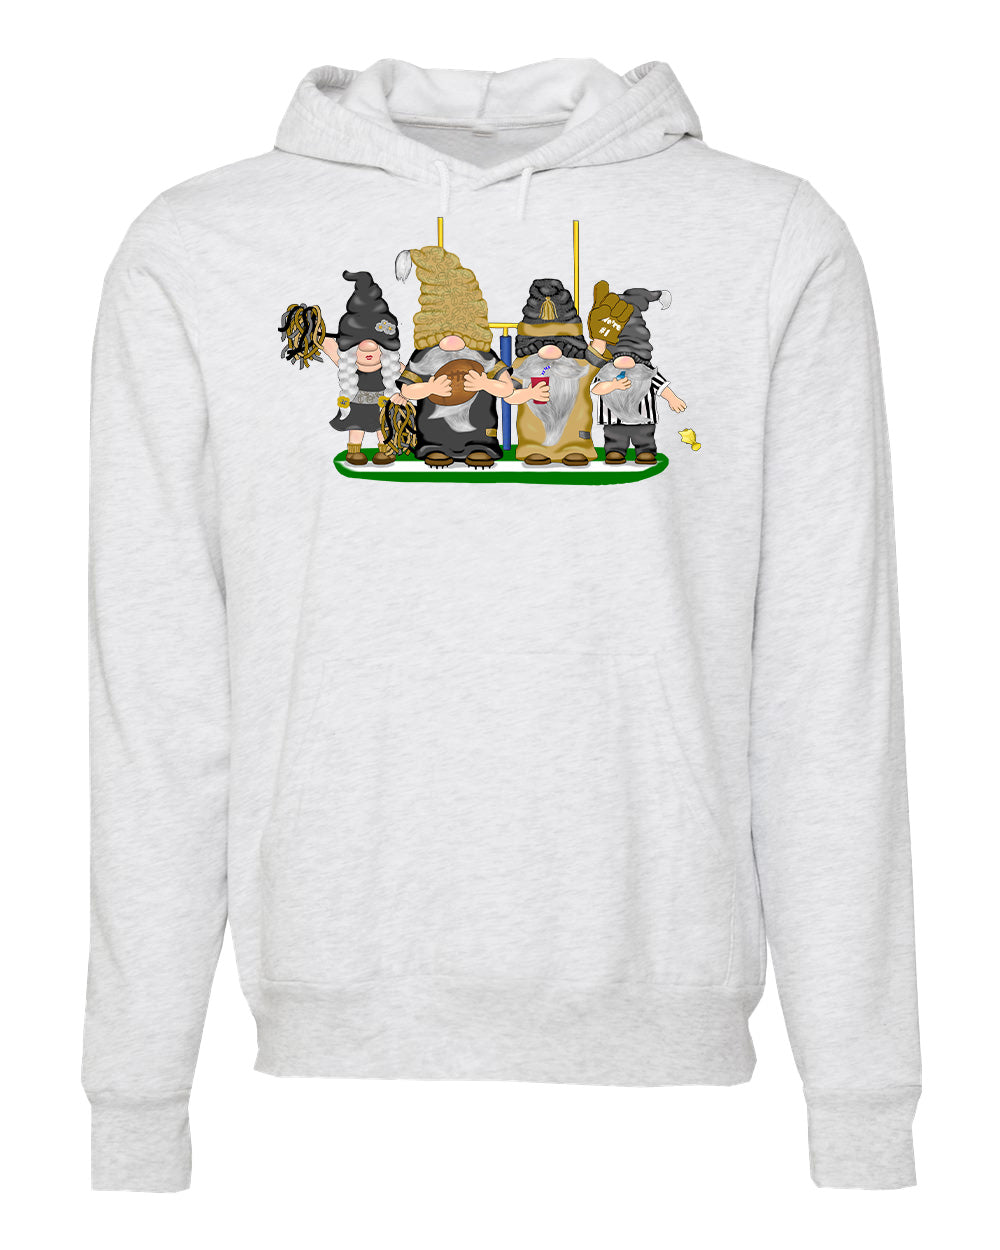 Gold & Black Football Gnomes (similar to New Orleans) on Unisex Hoodie